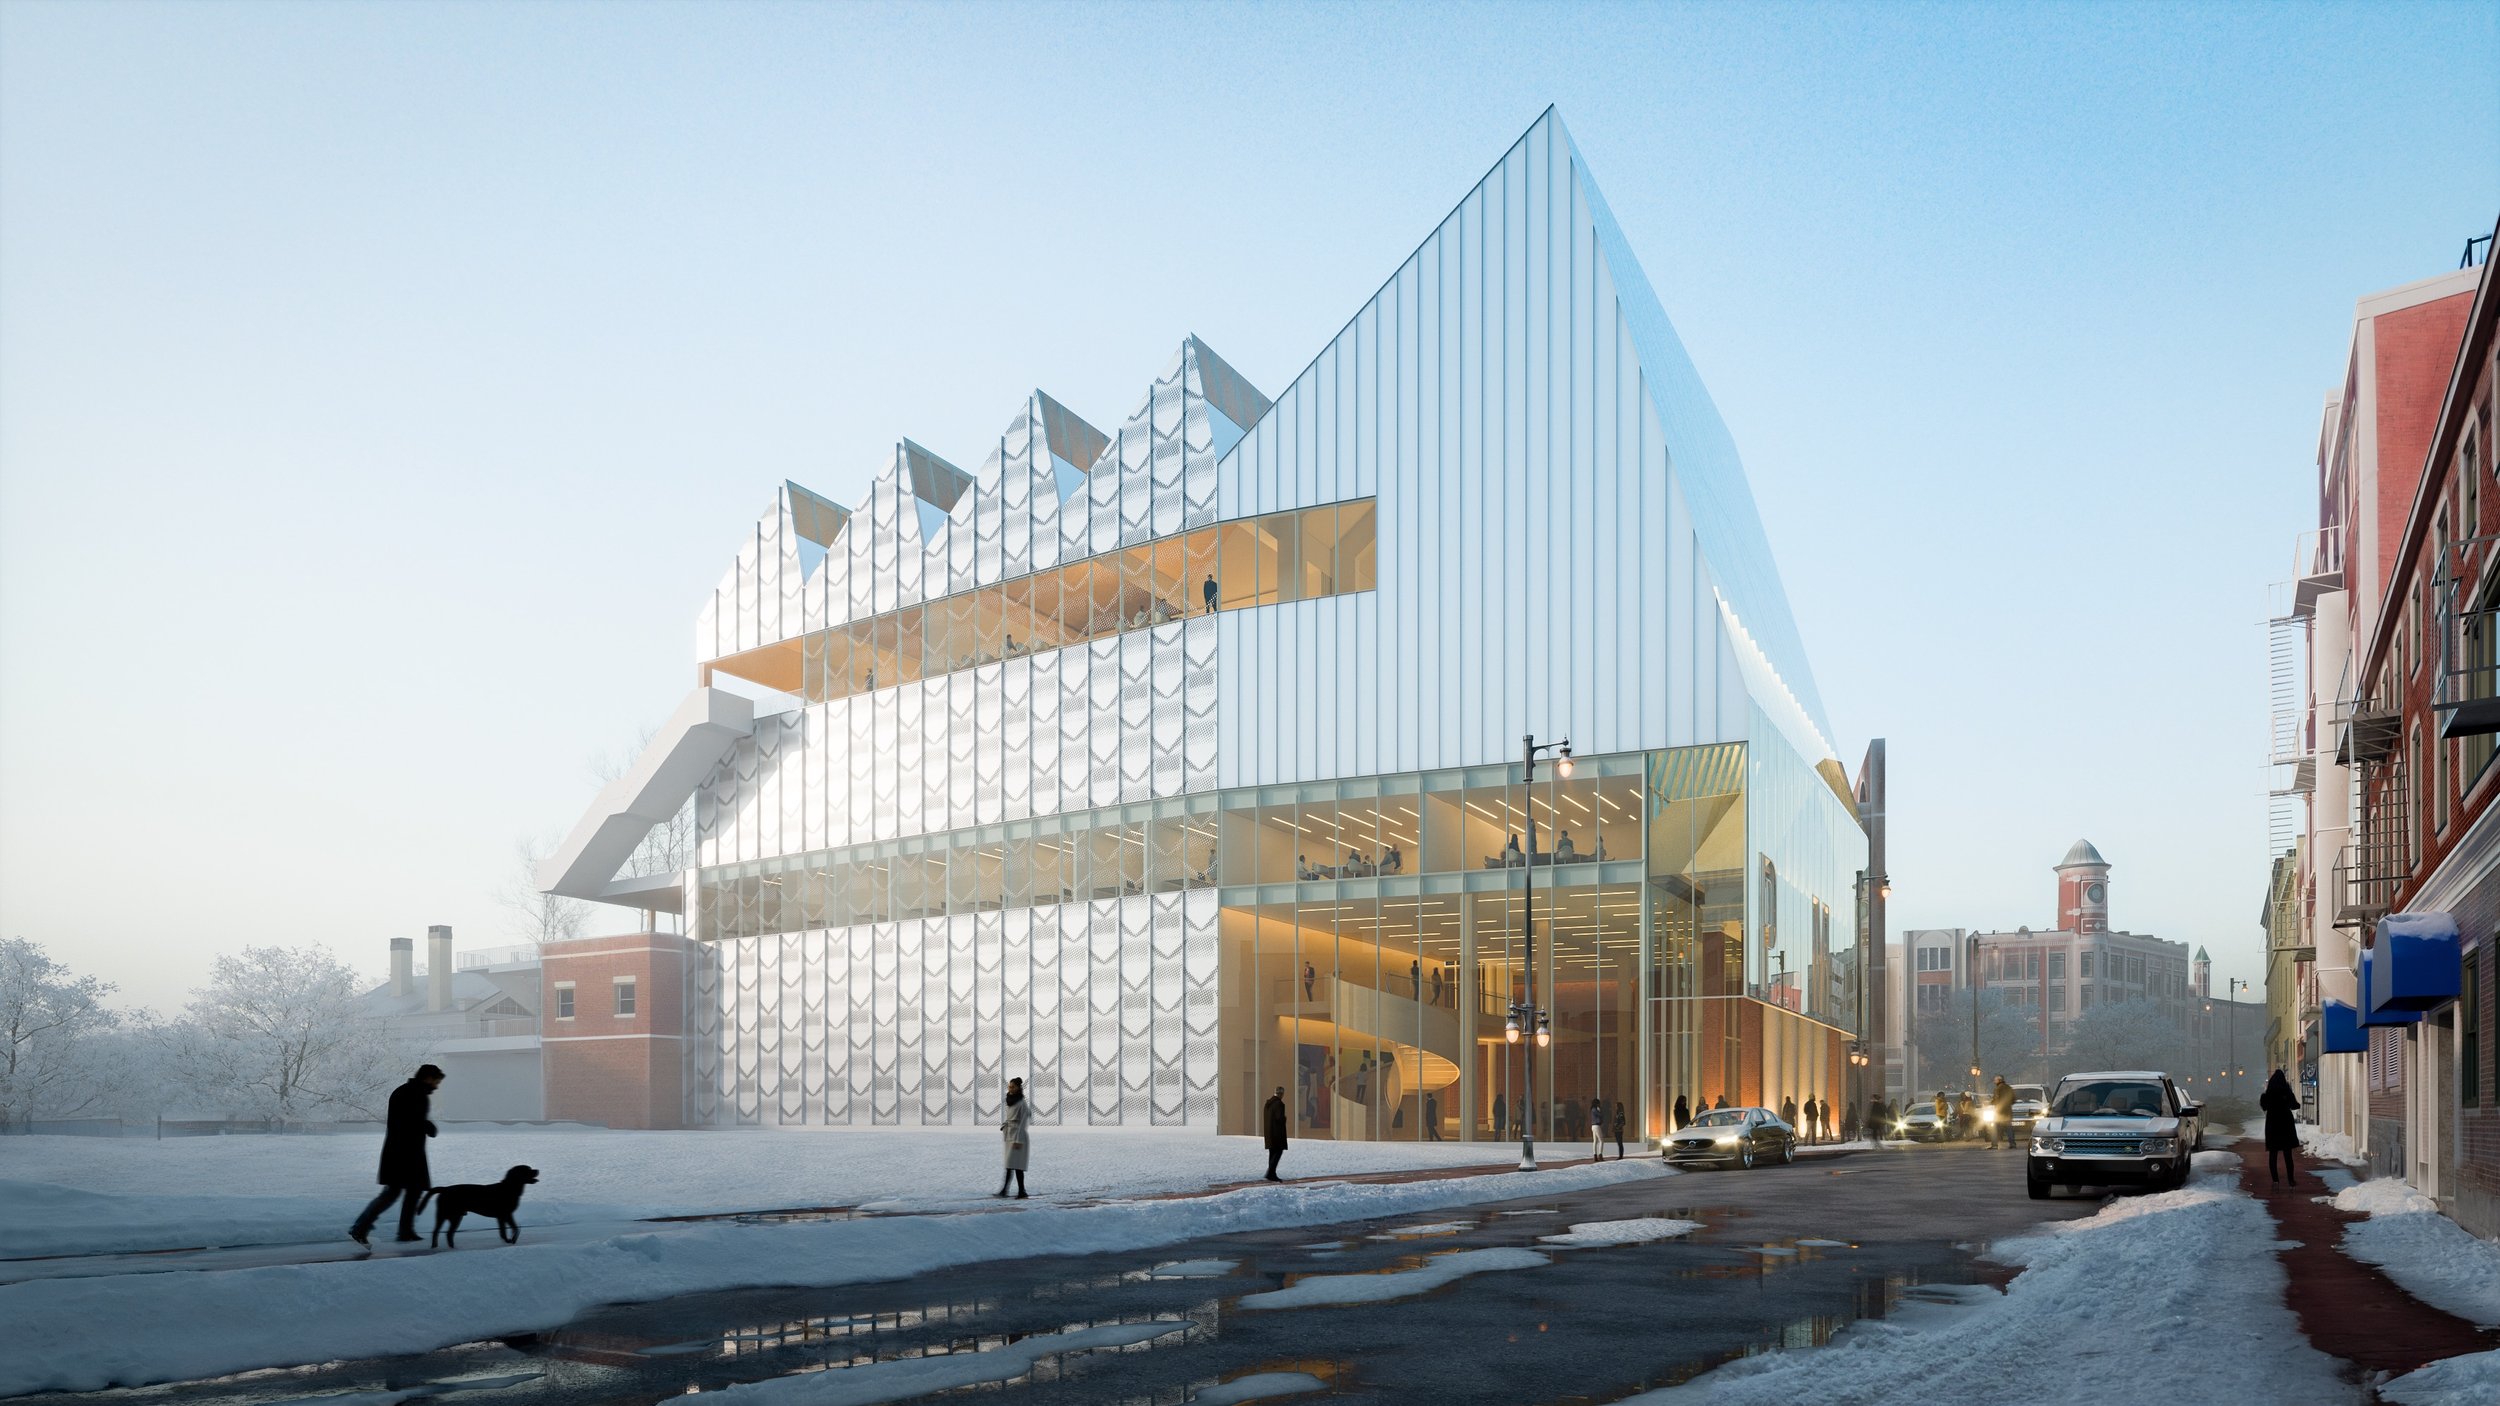  The New Wing seen from Free St., in the Winter. Image courtesy of Portland Museum of Art, Maine / Toshiko Mori Architect / Dovetail Design Strategists 